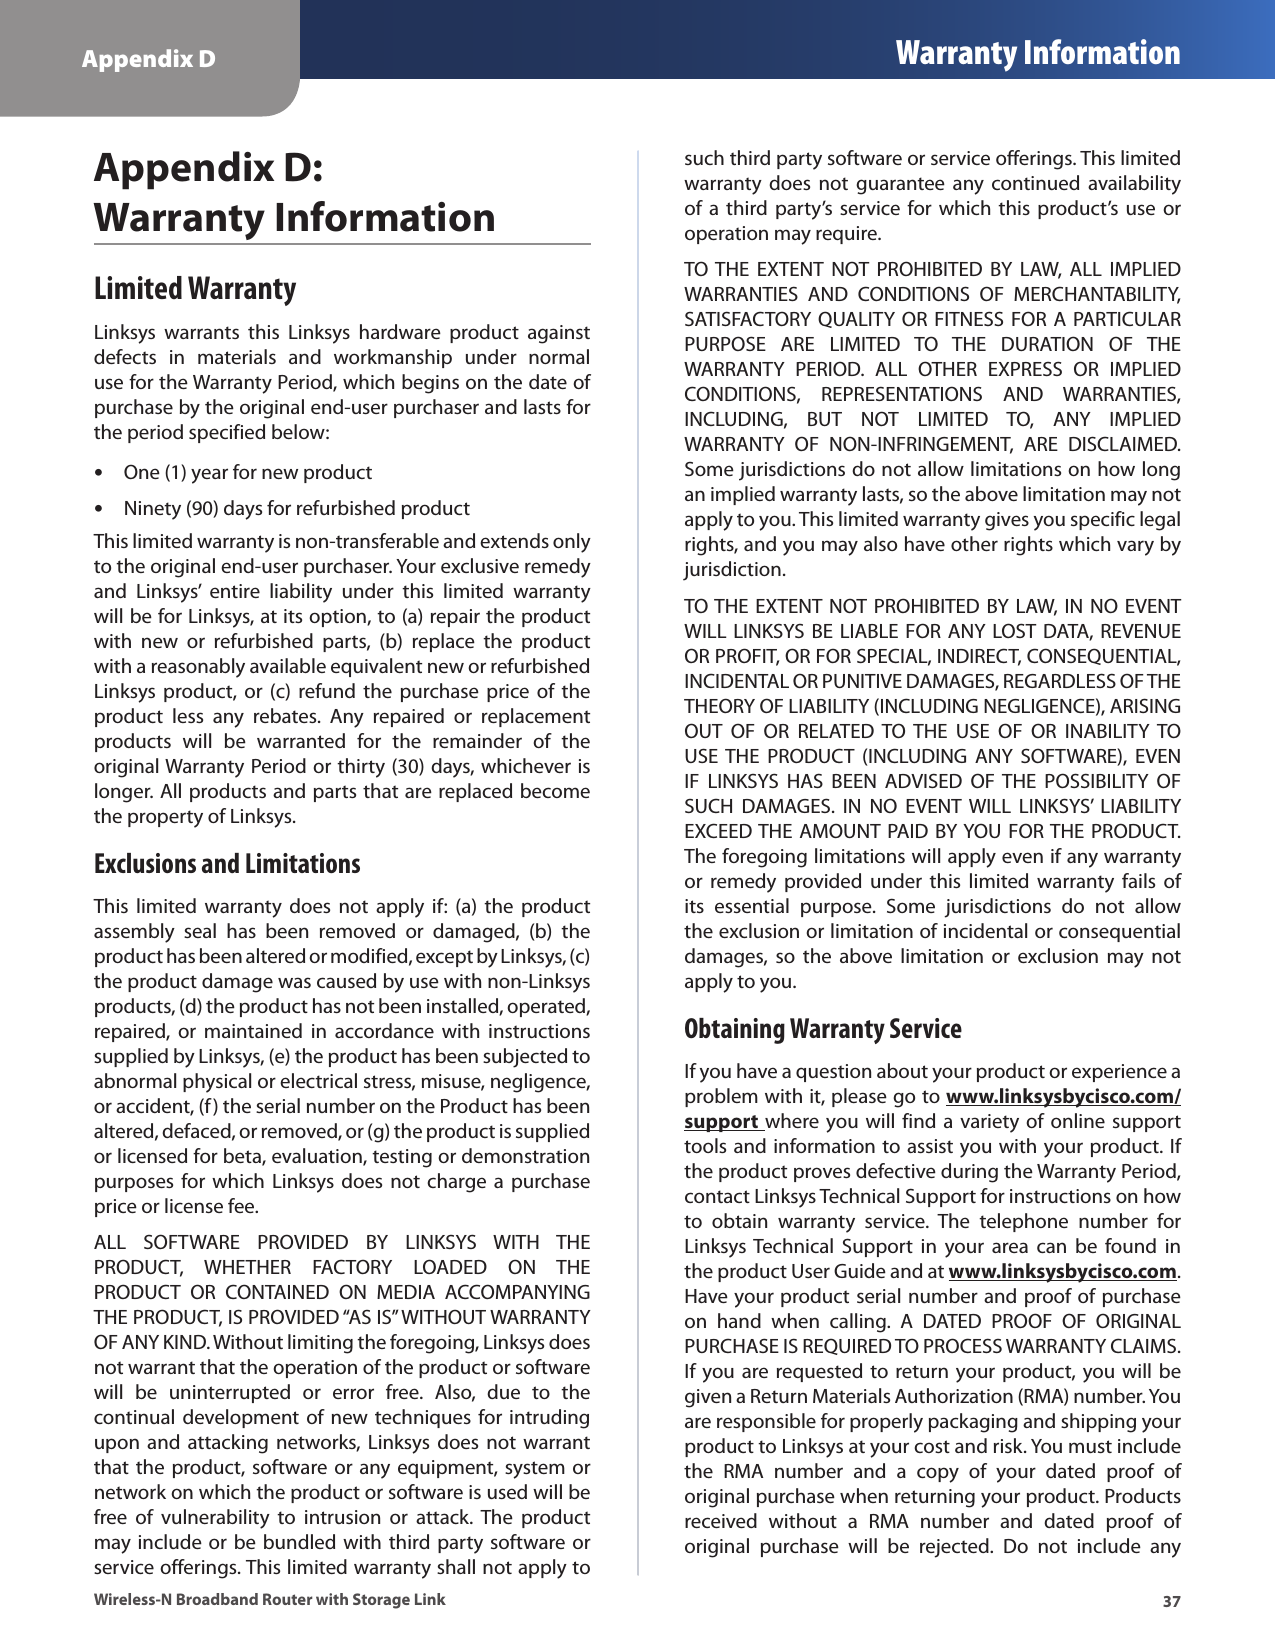 Appendix D Warranty Information37Wireless-N Broadband Router with Storage LinkAppendix D:  Warranty InformationLimited WarrantyLinksys  warrants  this  Linksys  hardware  product  against defects  in  materials  and  workmanship  under  normal use for the Warranty Period, which begins on the date of purchase by the original end-user purchaser and lasts for the period specified below:One (1) year for new product •Ninety (90) days for refurbished product •This limited warranty is non-transferable and extends only to the original end-user purchaser. Your exclusive remedy and  Linksys’  entire  liability  under  this  limited  warranty will be for Linksys, at its option, to (a) repair the product with  new  or  refurbished  parts,  (b)  replace  the  product with a reasonably available equivalent new or refurbished Linksys product,  or  (c)  refund  the  purchase  price of  the product  less  any  rebates.  Any  repaired  or  replacement products  will  be  warranted  for  the  remainder  of  the original Warranty Period or thirty (30) days, whichever is longer. All products and parts that are replaced become the property of Linksys.Exclusions and LimitationsThis  limited  warranty  does  not  apply  if:  (a)  the  product assembly  seal  has  been  removed  or  damaged,  (b)  the product has been altered or modified, except by Linksys, (c) the product damage was caused by use with non-Linksys products, (d) the product has not been installed, operated, repaired,  or  maintained  in  accordance  with  instructions supplied by Linksys, (e) the product has been subjected to abnormal physical or electrical stress, misuse, negligence, or accident, (f) the serial number on the Product has been altered, defaced, or removed, or (g) the product is supplied or licensed for beta, evaluation, testing or demonstration purposes for which  Linksys  does  not  charge  a  purchase price or license fee.ALL  SOFTWARE  PROVIDED  BY  LINKSYS  WITH  THE PRODUCT,  WHETHER  FACTORY  LOADED  ON  THE PRODUCT  OR  CONTAINED  ON  MEDIA  ACCOMPANYING THE PRODUCT, IS PROVIDED “AS IS” WITHOUT WARRANTY OF ANY KIND. Without limiting the foregoing, Linksys does not warrant that the operation of the product or software will  be  uninterrupted  or  error  free.  Also,  due  to  the continual development of  new techniques for intruding upon and  attacking  networks, Linksys  does  not warrant that the product, software or any equipment, system or network on which the product or software is used will be free  of  vulnerability  to  intrusion  or  attack.  The  product may include or  be bundled with third party software or service offerings. This limited warranty shall not apply to such third party software or service offerings. This limited warranty  does  not  guarantee  any  continued  availability of a  third  party’s  service  for  which  this  product’s  use  or operation may require. TO THE  EXTENT  NOT  PROHIBITED  BY  LAW,  ALL  IMPLIED WARRANTIES  AND  CONDITIONS  OF  MERCHANTABILITY, SATISFACTORY  QUALITY OR  FITNESS FOR A PARTICULAR PURPOSE  ARE  LIMITED  TO  THE  DURATION  OF  THE WARRANTY  PERIOD.  ALL  OTHER  EXPRESS  OR  IMPLIED CONDITIONS,  REPRESENTATIONS  AND  WARRANTIES, INCLUDING,  BUT  NOT  LIMITED  TO,  ANY  IMPLIED WARRANTY  OF  NON-INFRINGEMENT,  ARE  DISCLAIMED. Some jurisdictions do not allow limitations on how long an implied warranty lasts, so the above limitation may not apply to you. This limited warranty gives you specific legal rights, and you may also have other rights which vary by jurisdiction.TO THE EXTENT  NOT PROHIBITED BY LAW, IN NO EVENT WILL LINKSYS BE LIABLE FOR ANY LOST  DATA, REVENUE OR PROFIT, OR FOR SPECIAL, INDIRECT, CONSEQUENTIAL, INCIDENTAL OR PUNITIVE DAMAGES, REGARDLESS OF THE THEORY OF LIABILITY (INCLUDING NEGLIGENCE), ARISING OUT  OF  OR  RELATED  TO  THE  USE  OF  OR  INABILITY  TO USE THE  PRODUCT  (INCLUDING  ANY  SOFTWARE),  EVEN IF  LINKSYS  HAS  BEEN  ADVISED  OF  THE  POSSIBILITY  OF SUCH  DAMAGES.  IN  NO  EVENT WILL  LINKSYS’  LIABILITY EXCEED THE AMOUNT PAID BY YOU  FOR THE PRODUCT. The foregoing limitations will apply even if any warranty or  remedy  provided  under  this  limited  warranty  fails  of its  essential  purpose.  Some  jurisdictions  do  not  allow the exclusion or limitation of incidental or consequential damages,  so  the  above  limitation  or  exclusion  may  not apply to you.Obtaining Warranty ServiceIf you have a question about your product or experience a problem with it, please go to www.linksysbycisco.com/support where you will  find a variety of online support tools and information to assist you with your product. If the product proves defective during the Warranty Period, contact Linksys Technical Support for instructions on how to  obtain  warranty  service.  The  telephone  number  for Linksys Technical  Support  in  your  area  can  be  found  in the product User Guide and at www.linksysbycisco.com. Have your product serial number and proof of purchase on  hand  when  calling.  A  DATED  PROOF  OF  ORIGINAL PURCHASE IS REQUIRED TO PROCESS WARRANTY CLAIMS. If you are requested to return your product, you will be given a Return Materials Authorization (RMA) number. You are responsible for properly packaging and shipping your product to Linksys at your cost and risk. You must include the  RMA  number  and  a  copy  of  your  dated  proof  of original purchase when returning your product. Products received  without  a  RMA  number  and  dated  proof  of original  purchase  will  be  rejected.  Do  not  include  any 